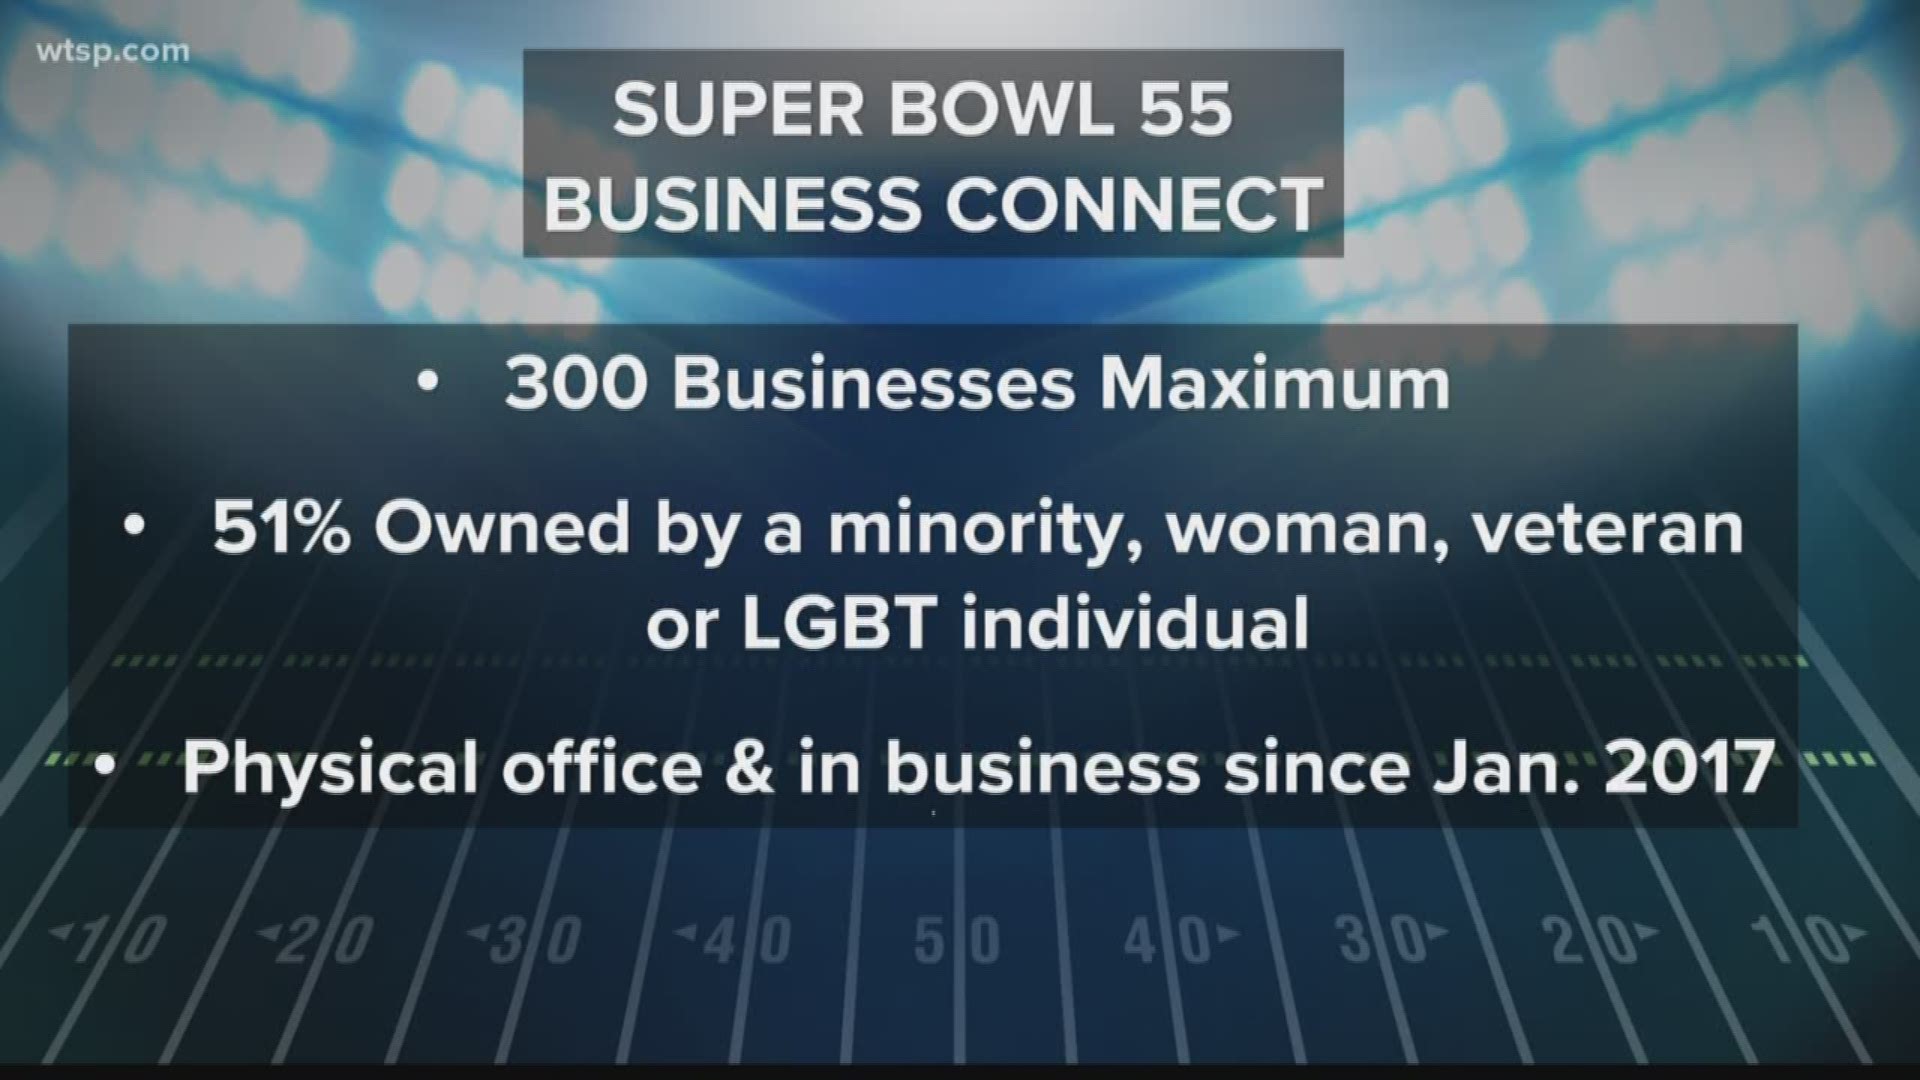 The NFL and Tampa Bay Super Bowl LV Host Committee on Monday announced the launch of the Business Connect program.